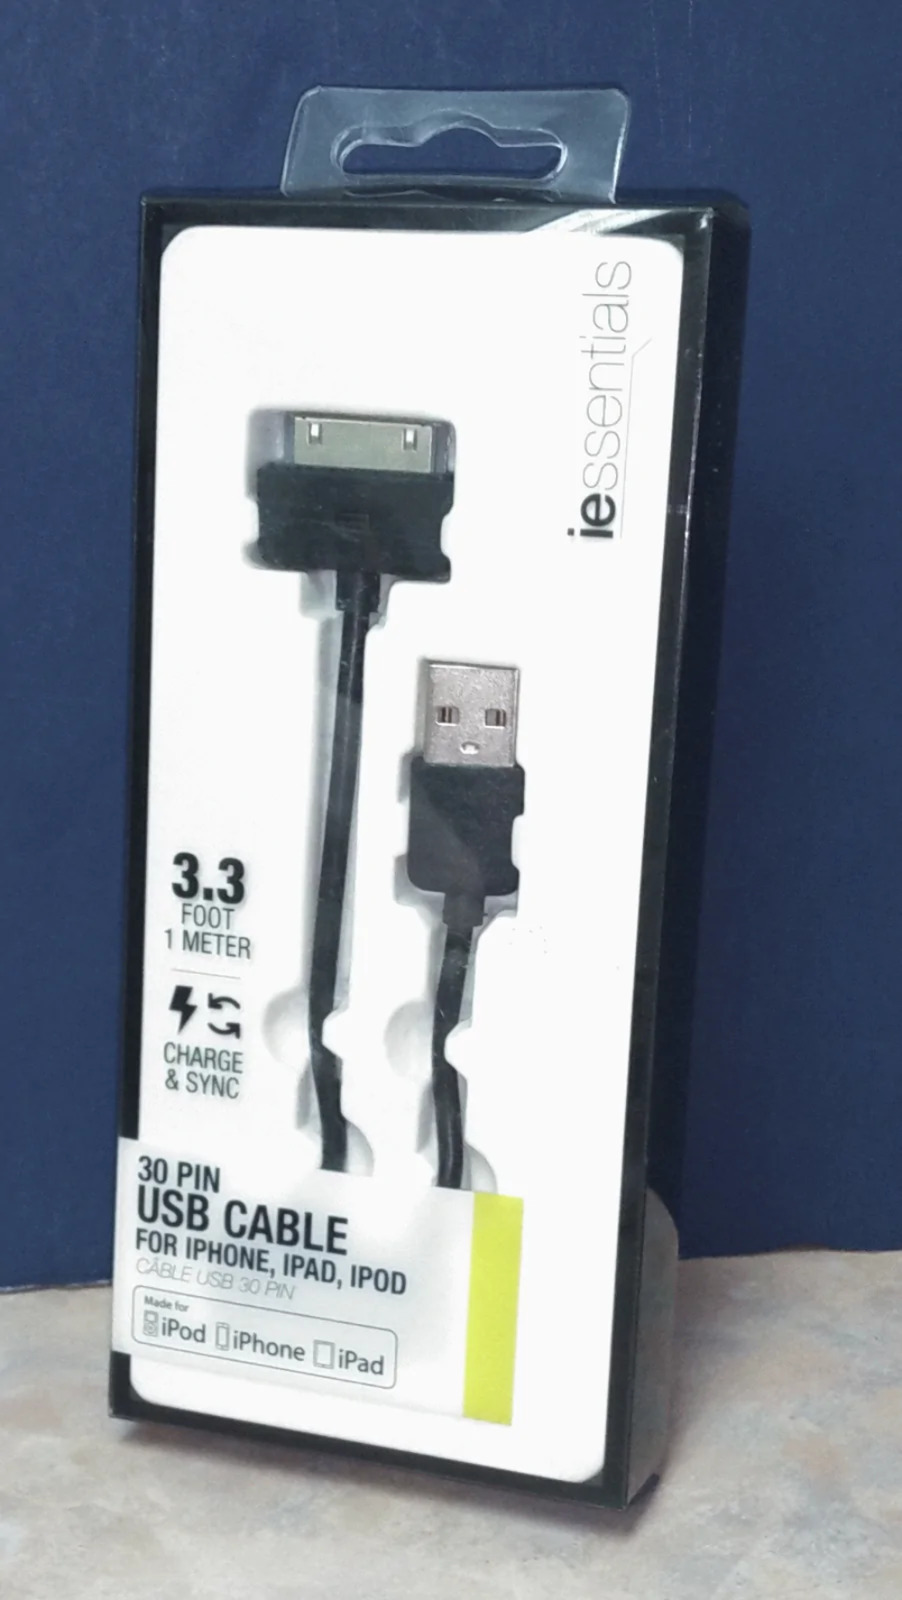 iPod iPad iPhone 30-Pin Connector USB 3.3 Ft. Sync Cable ~ New Sealed